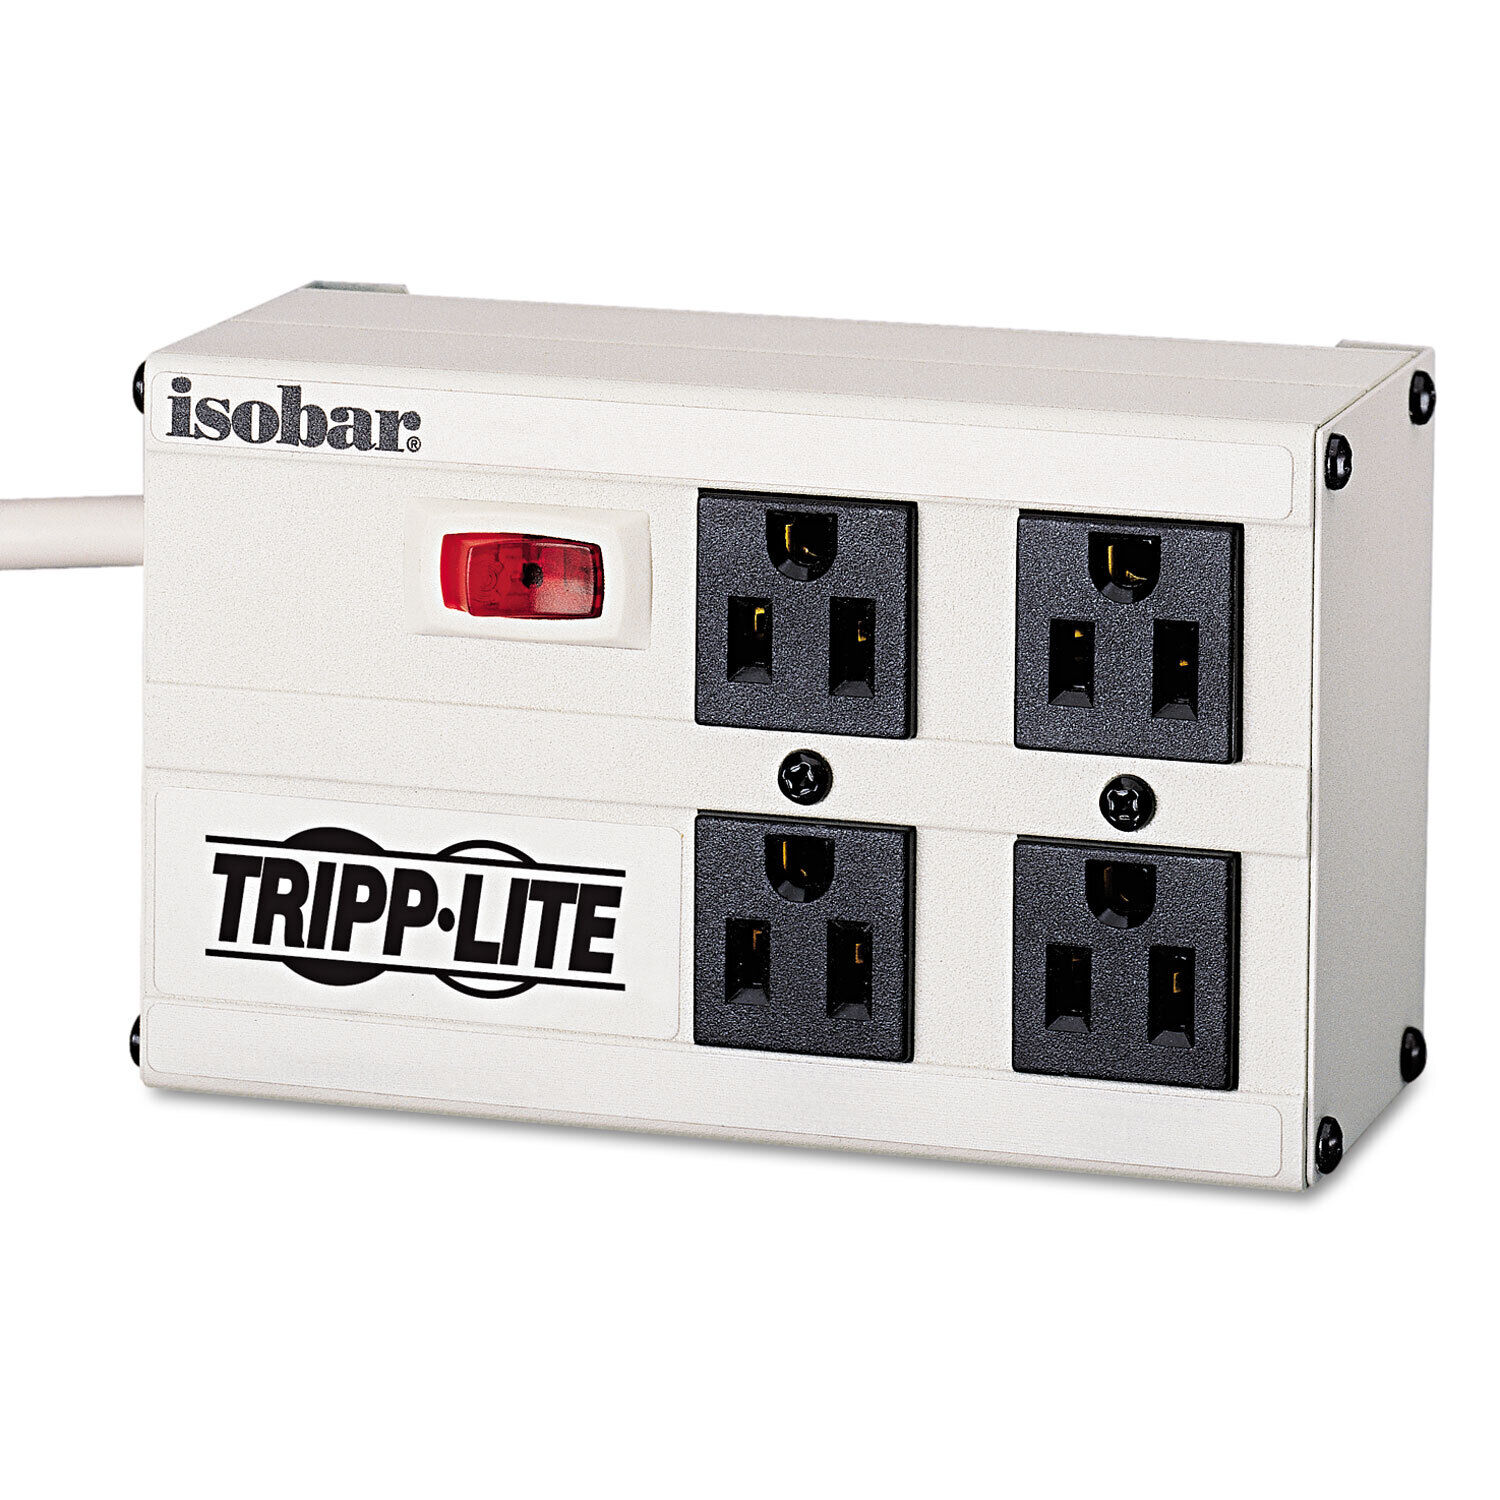 Tripp Lite ISOBAR4 Isobar Surge Suppressor 4 Outlets 6 ft Cord 330 Joules Light